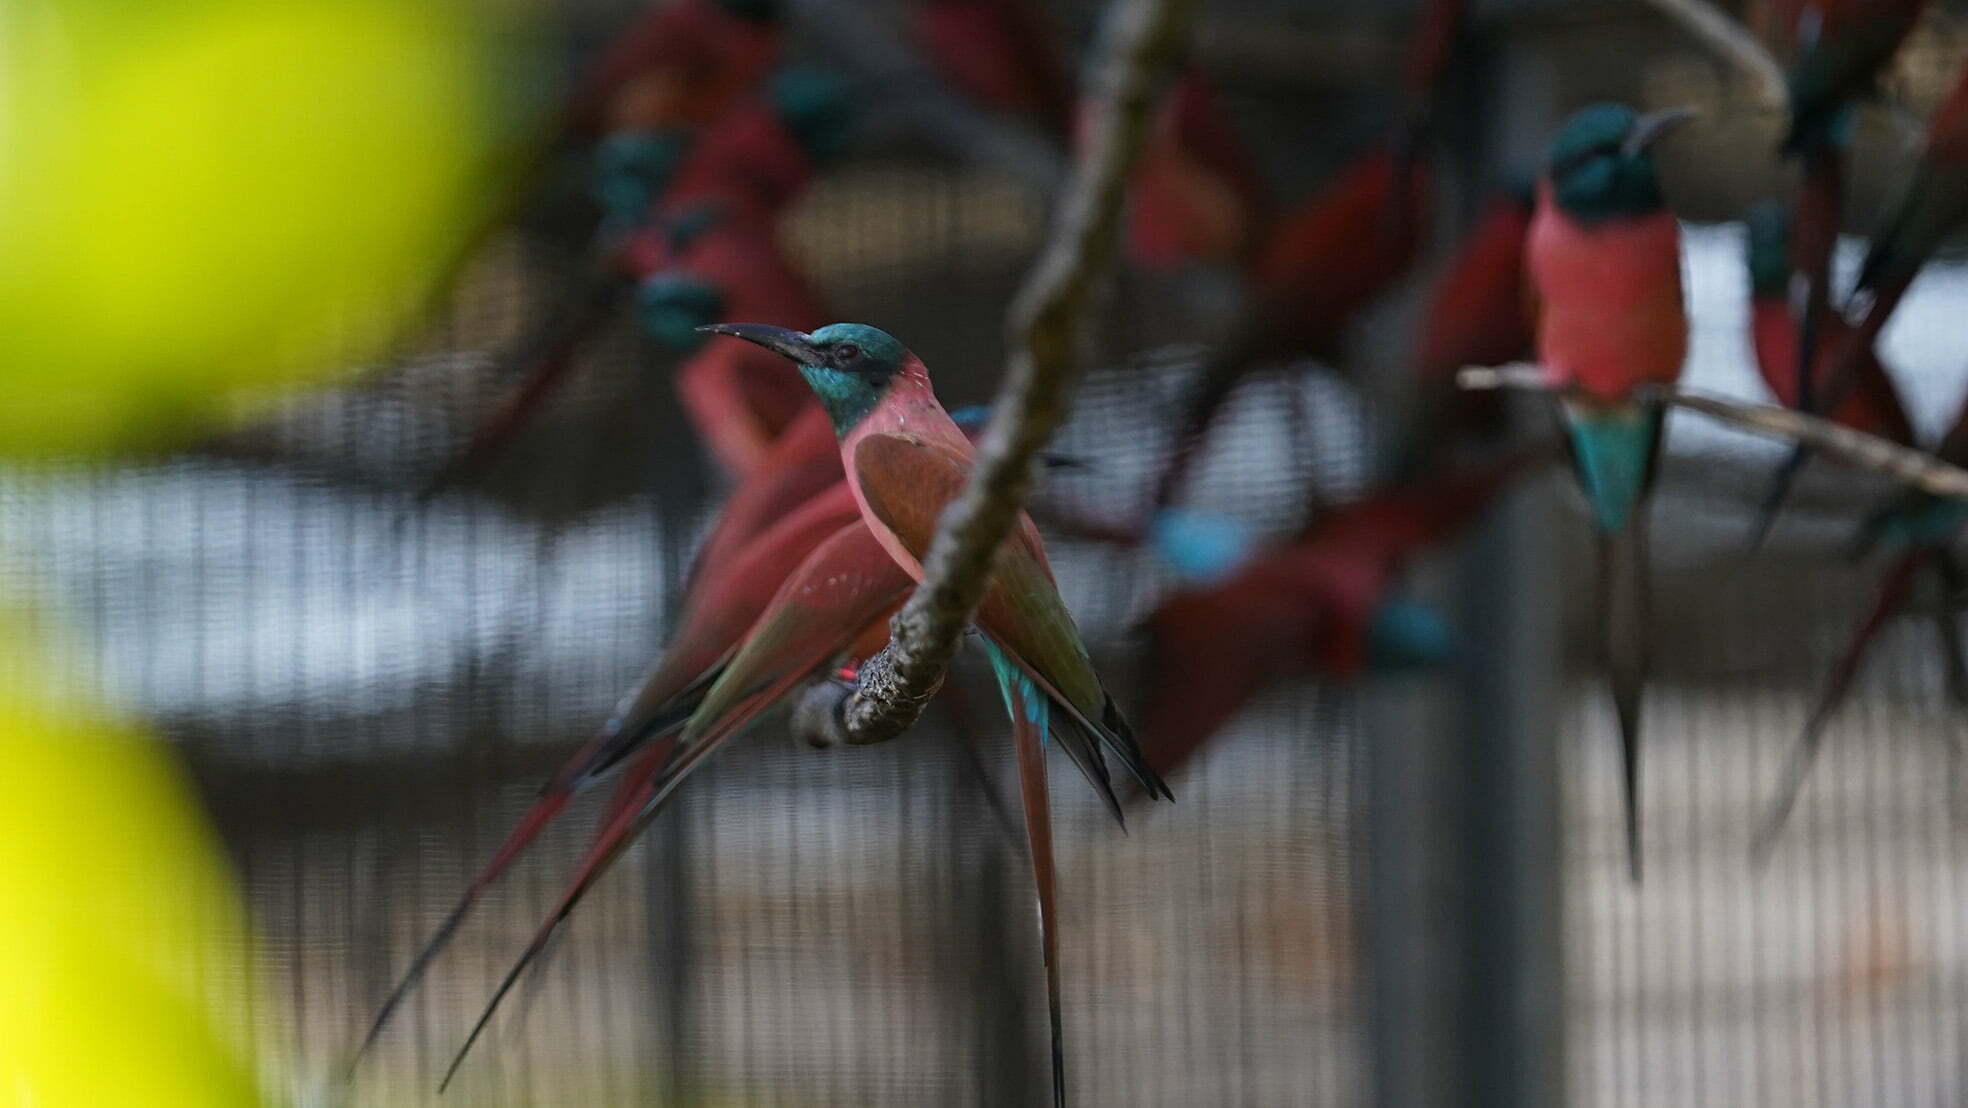 Northern Carmine Bee-Eaters perched on branches in their habitat at Disney's Animal Kingdom.